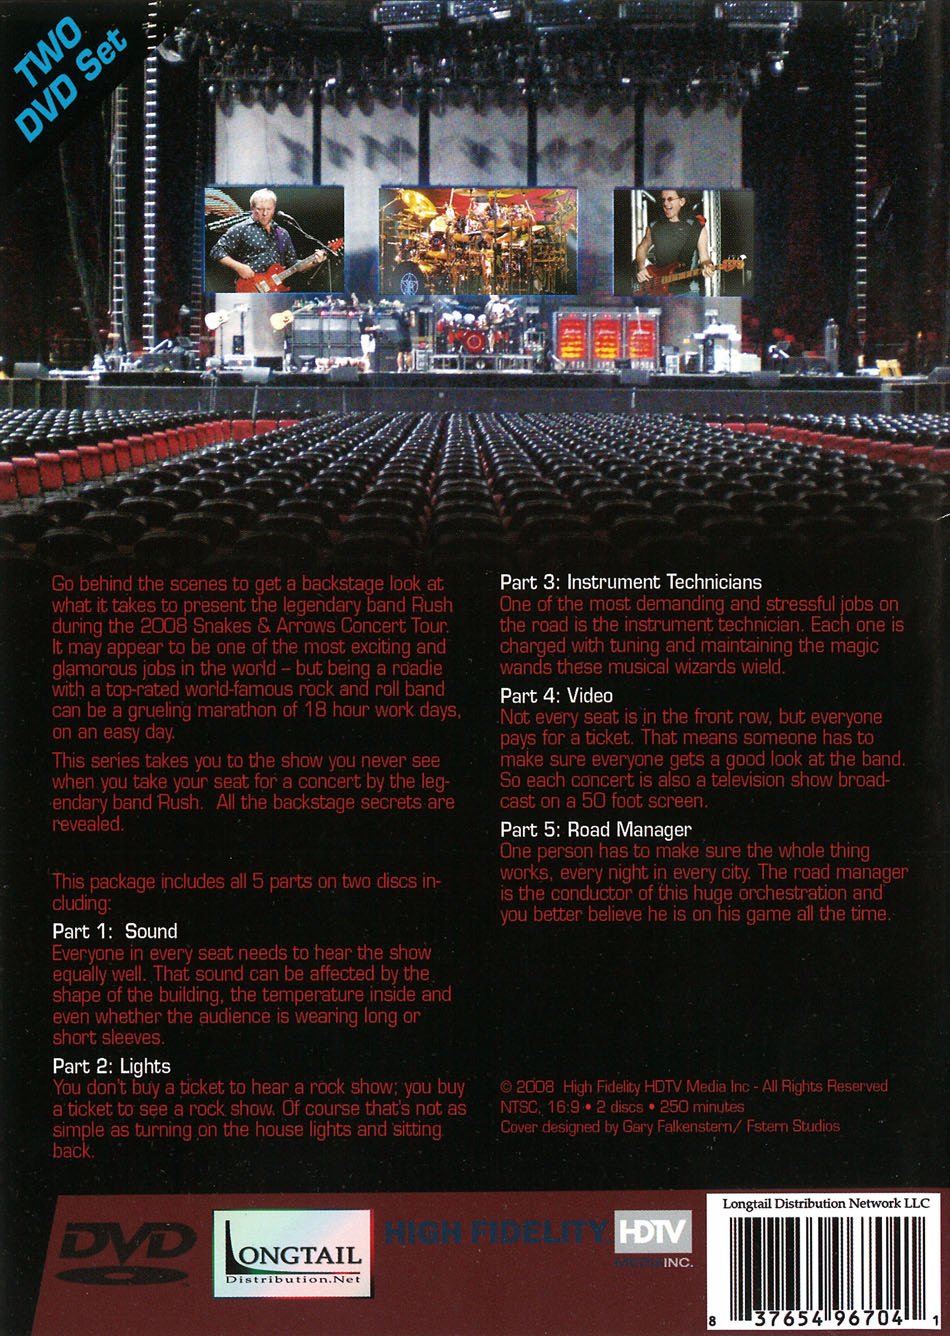 Backstage Secrets: On the Road With Rush